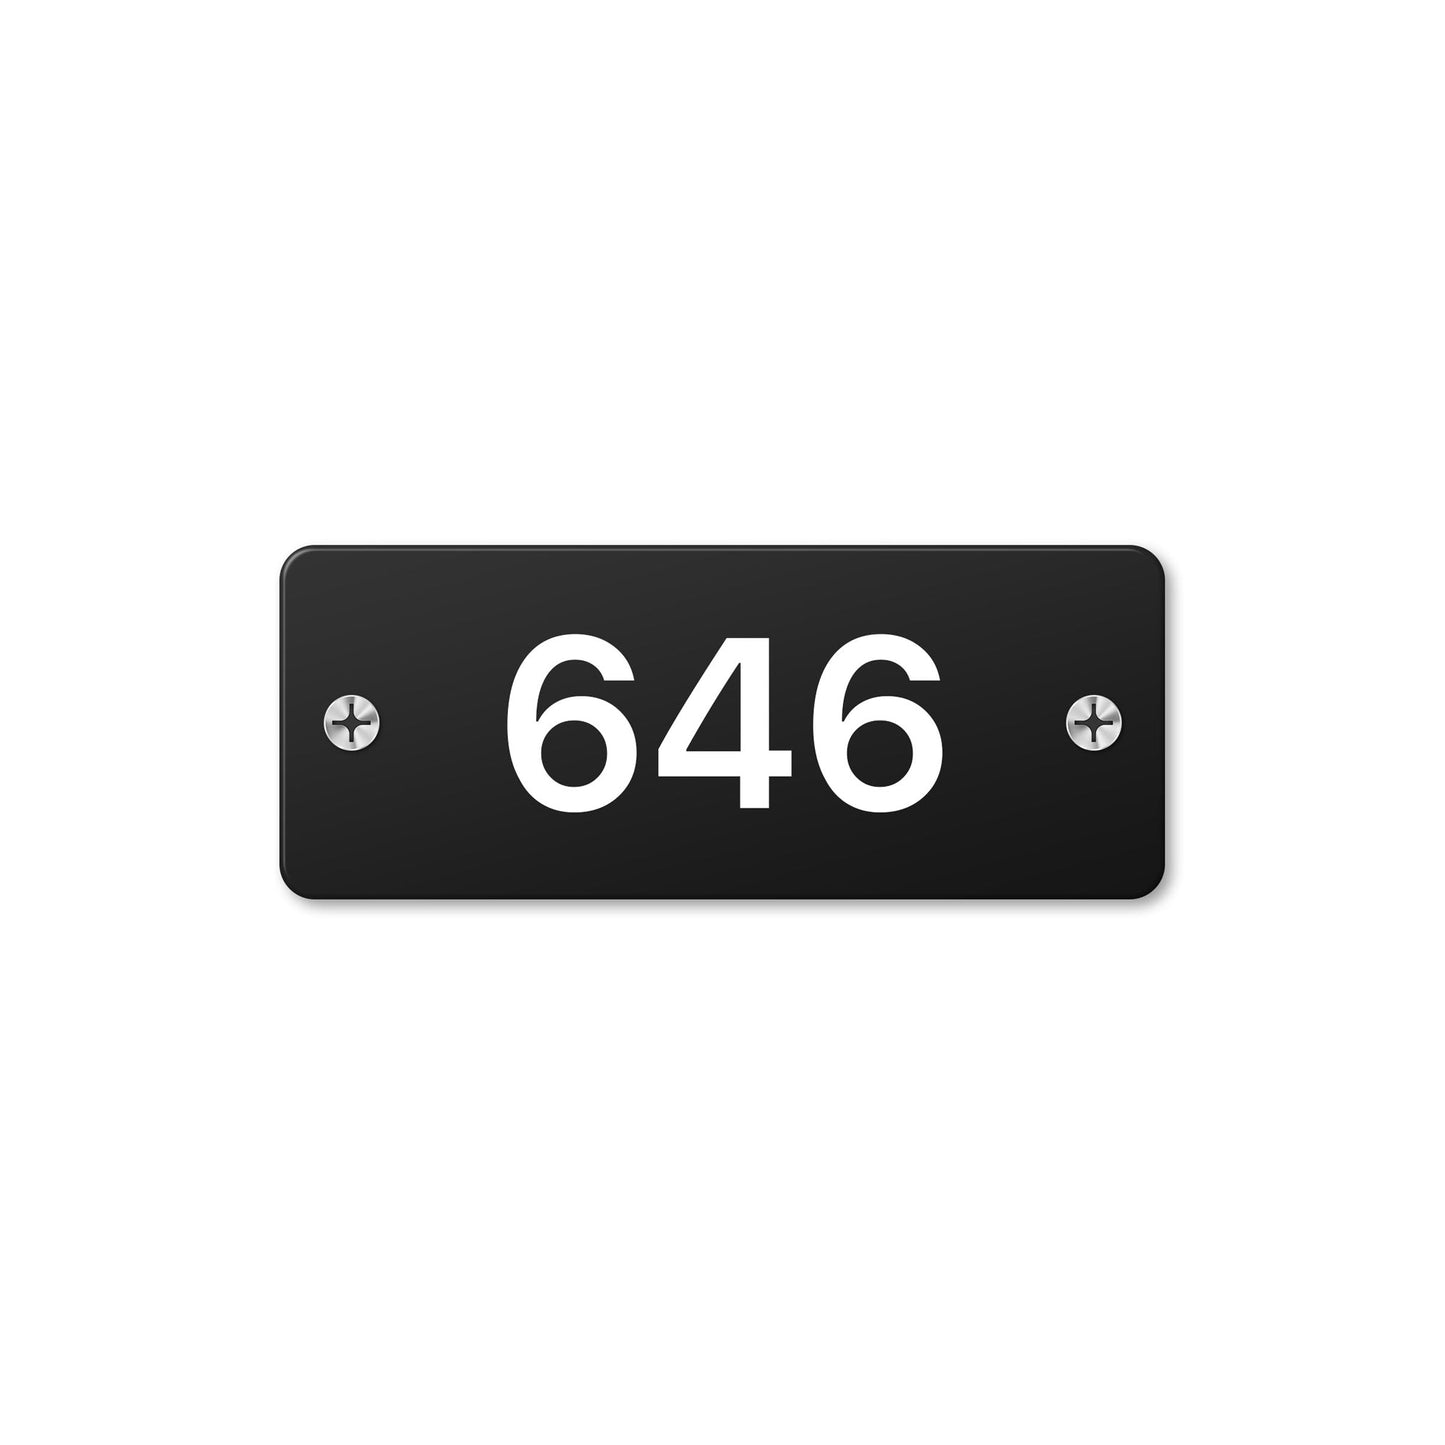 Numeral 646